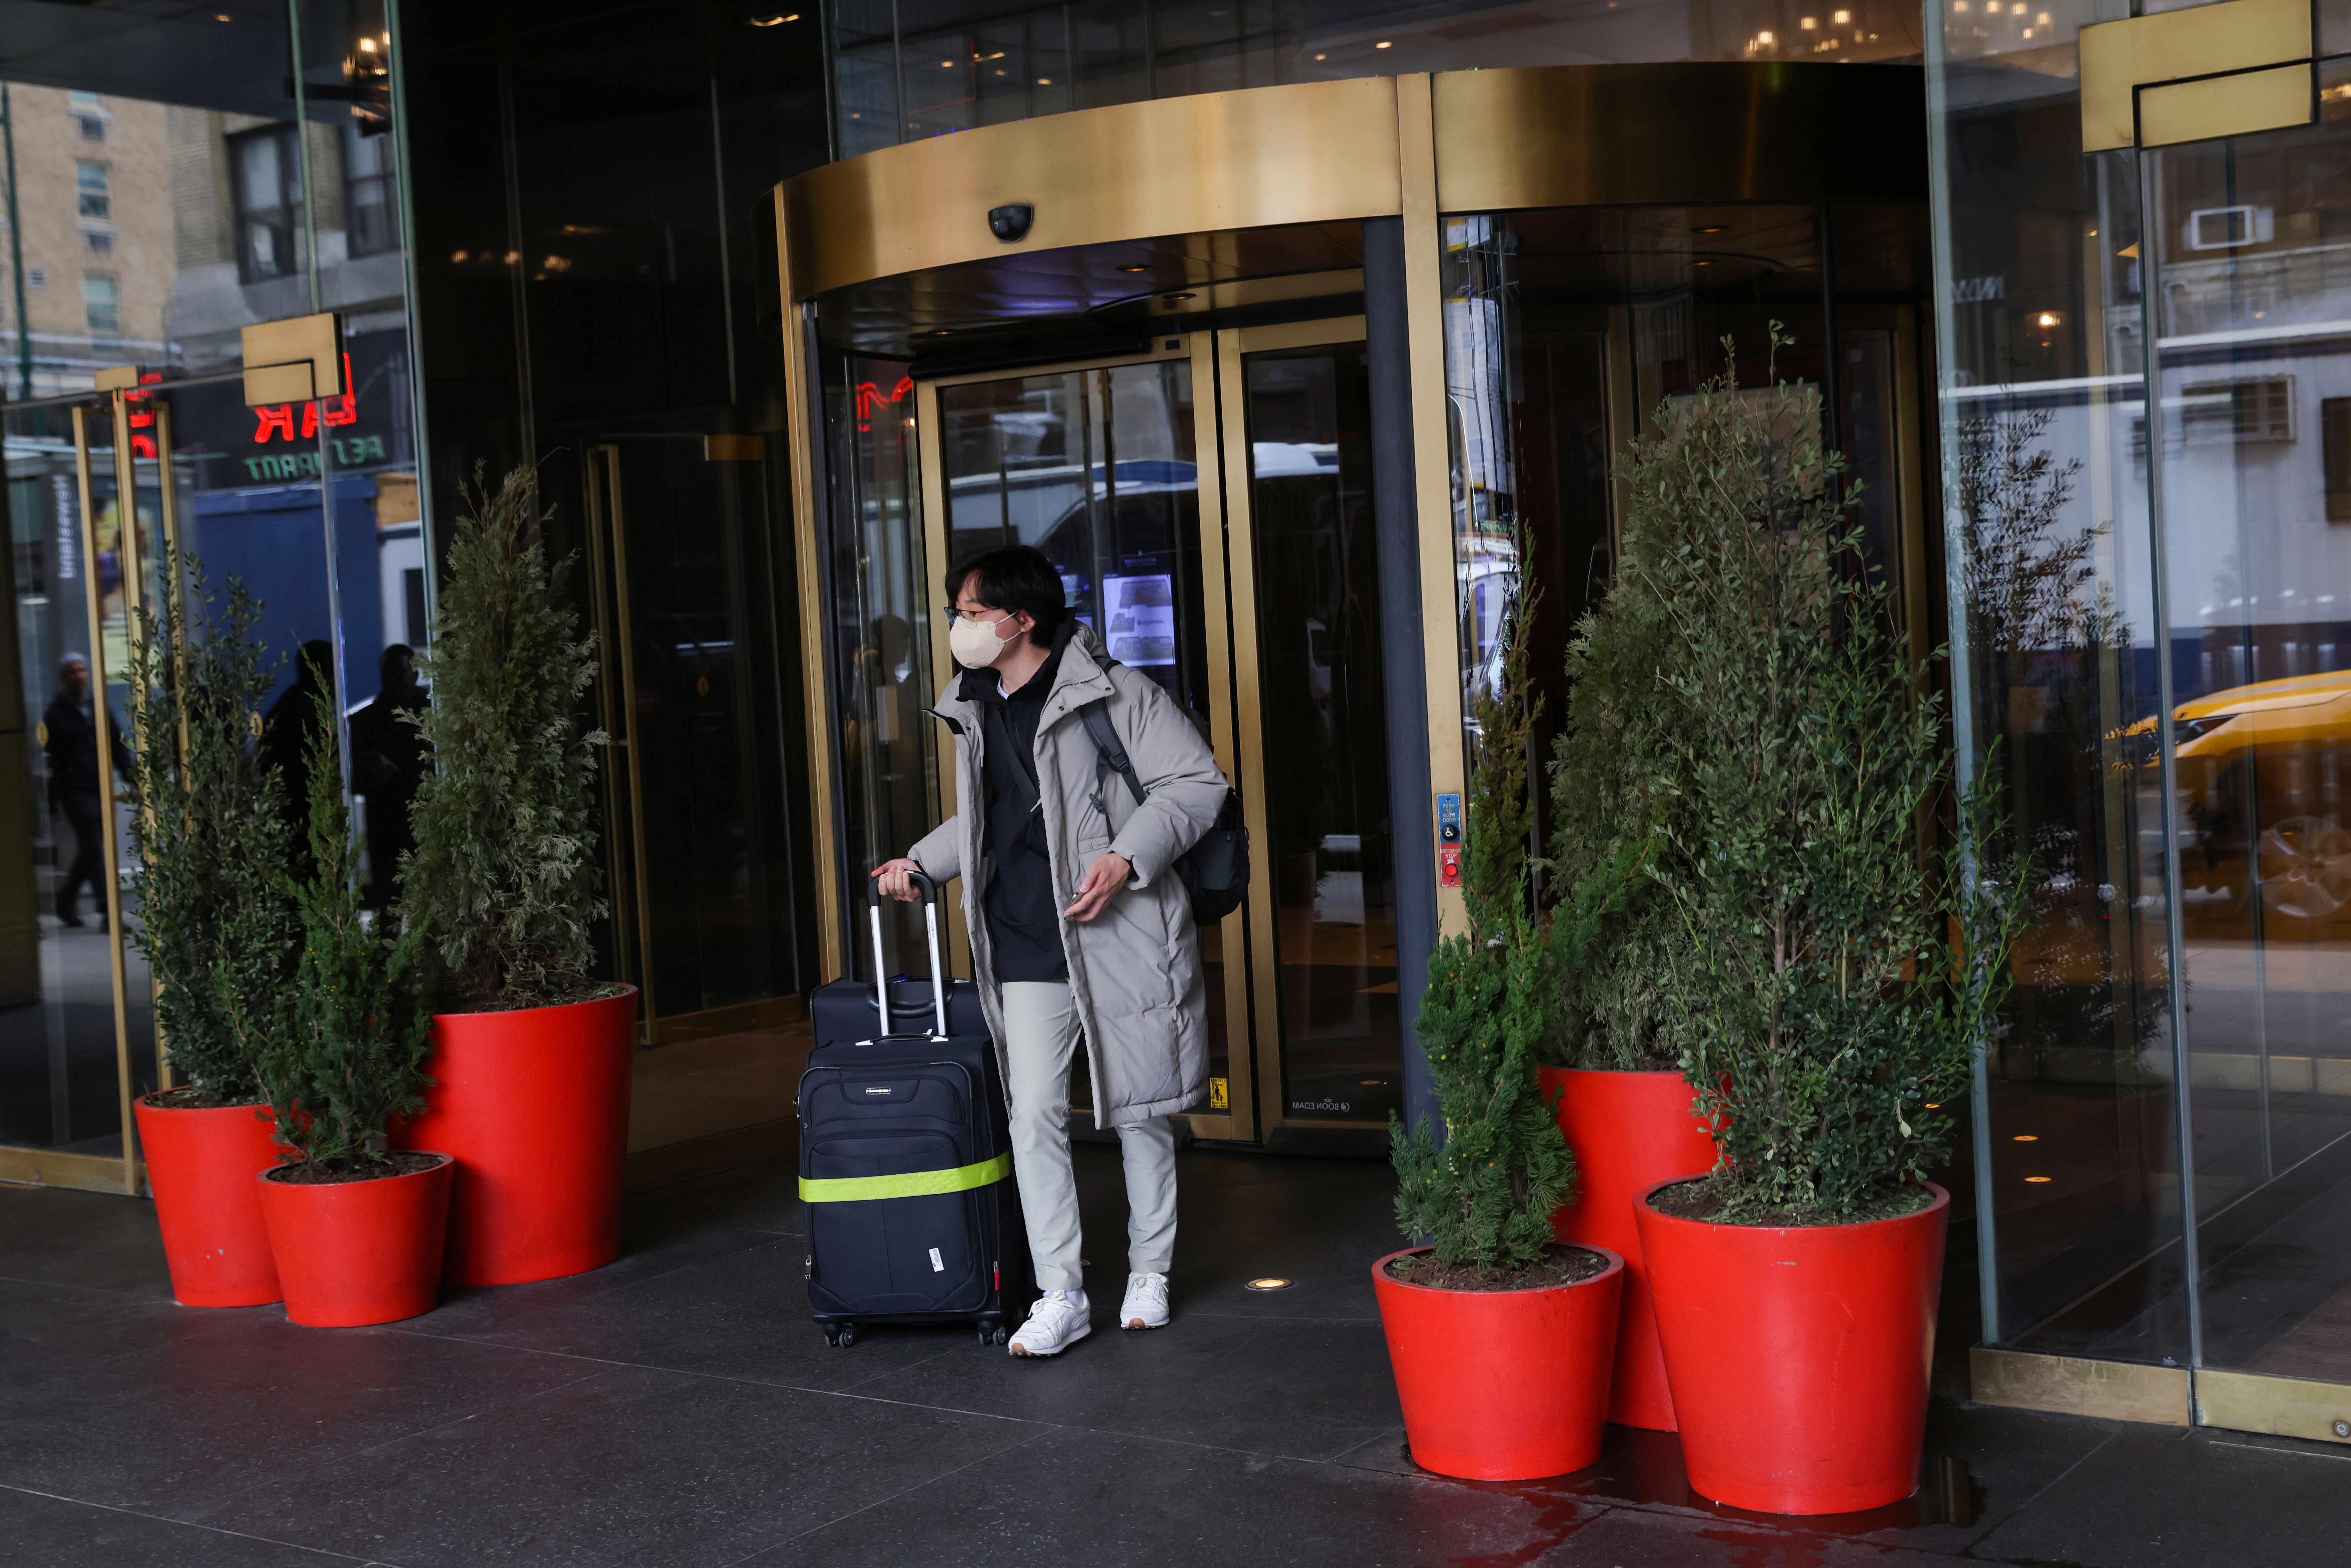 A person exits an InterContinental hotel in Manhattan, New York City